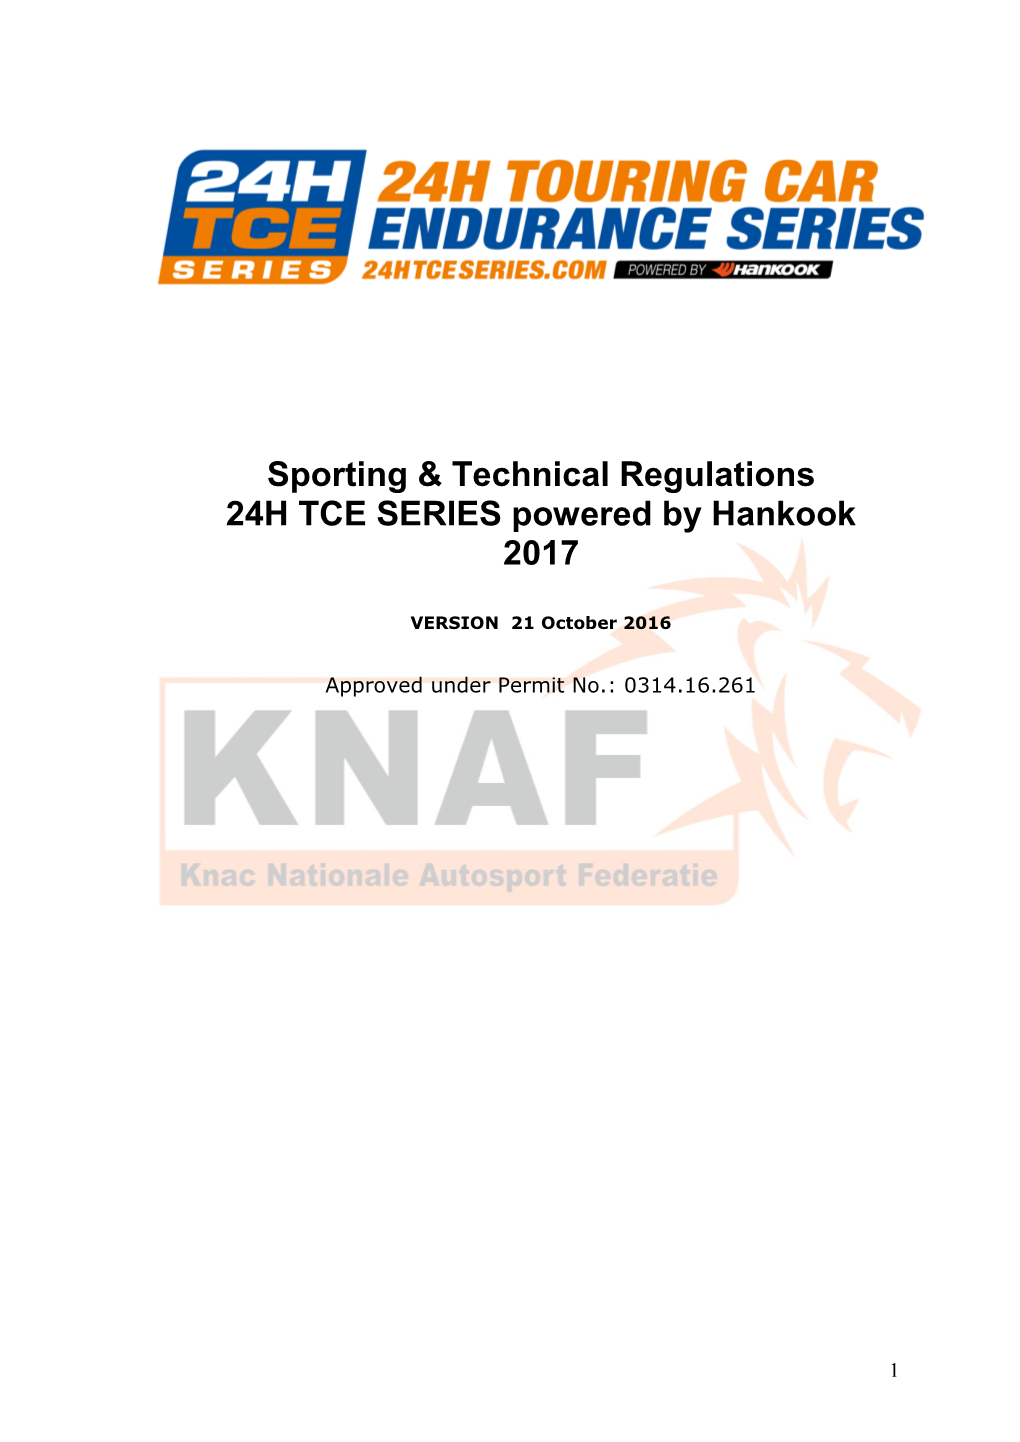 Sporting & Technical Regulations 24H TCE SERIES Powered by Hankook